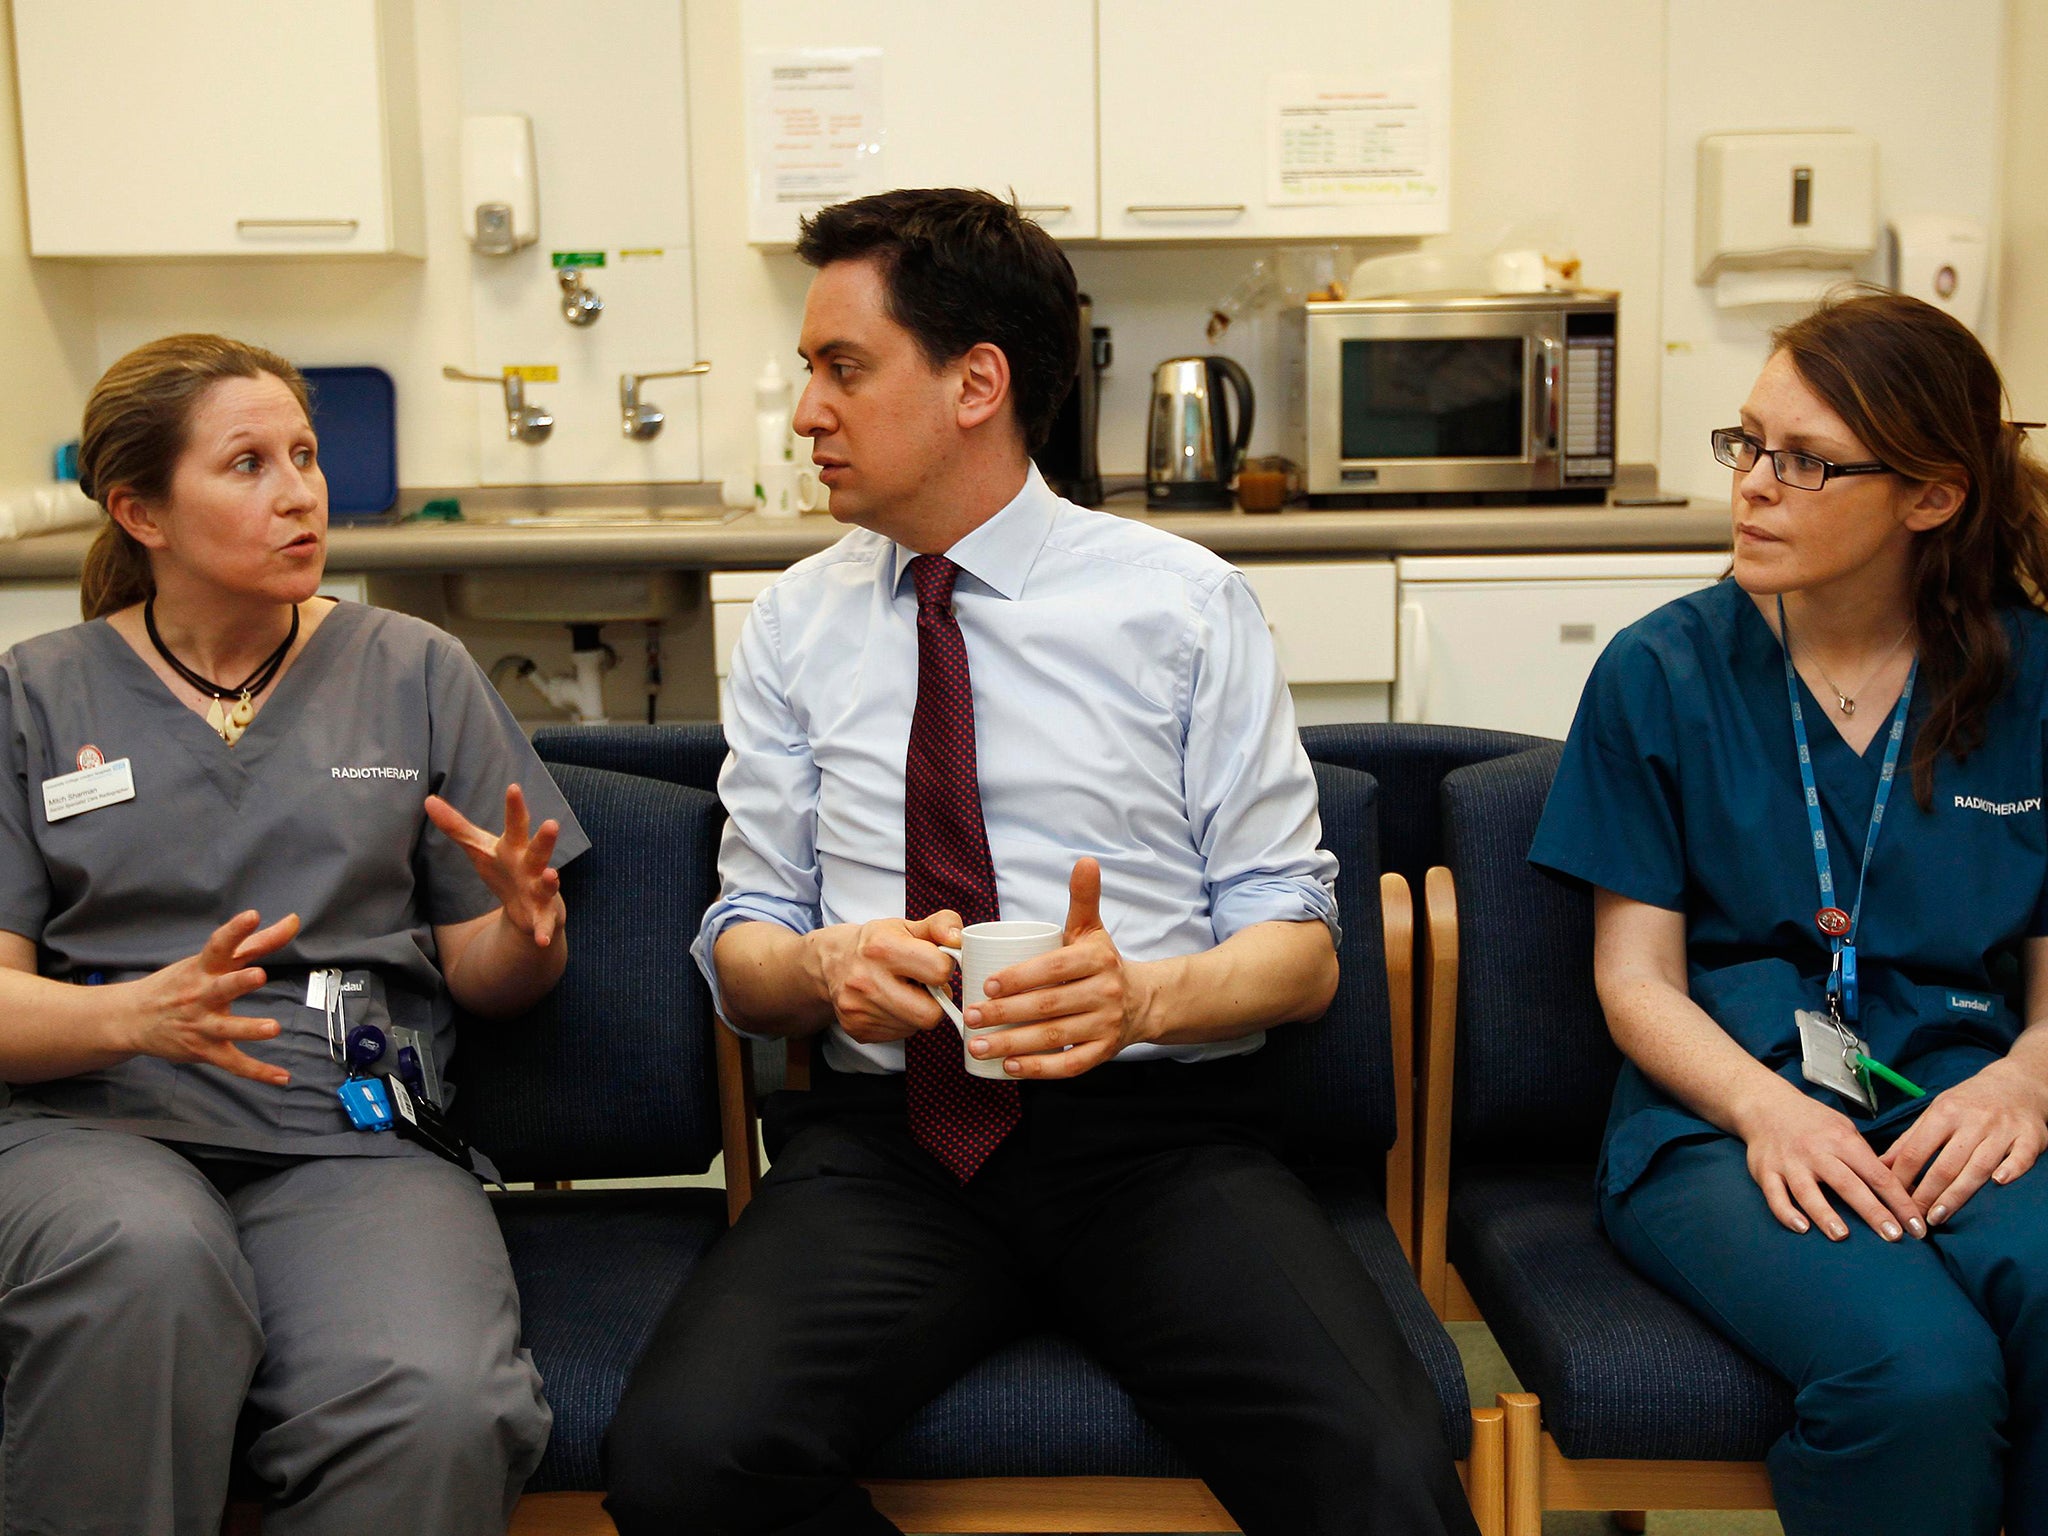 Labour's plans health ought to ease the immediate pressures on the NHS